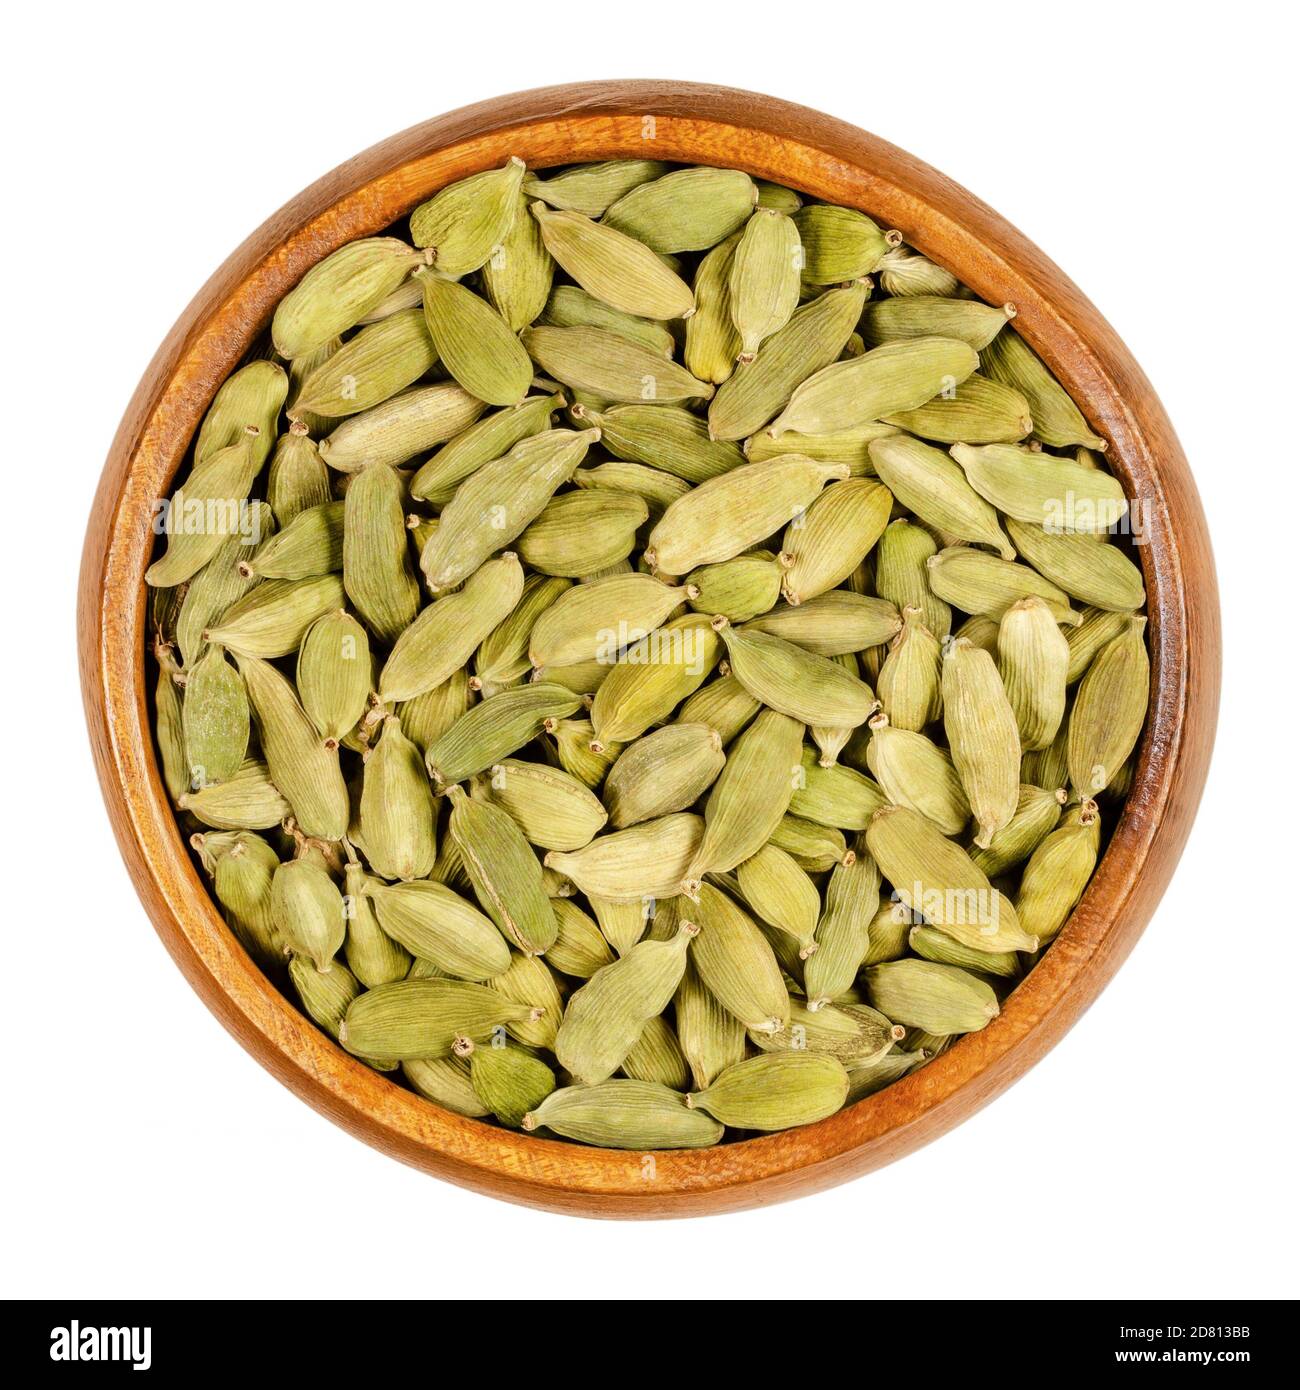 Green cardamom pods in a wooden bowl. True cardamom, processed pods and seeds of Elettaria cardamomum, sometimes cardamon or cardamum, used as a spice Stock Photo